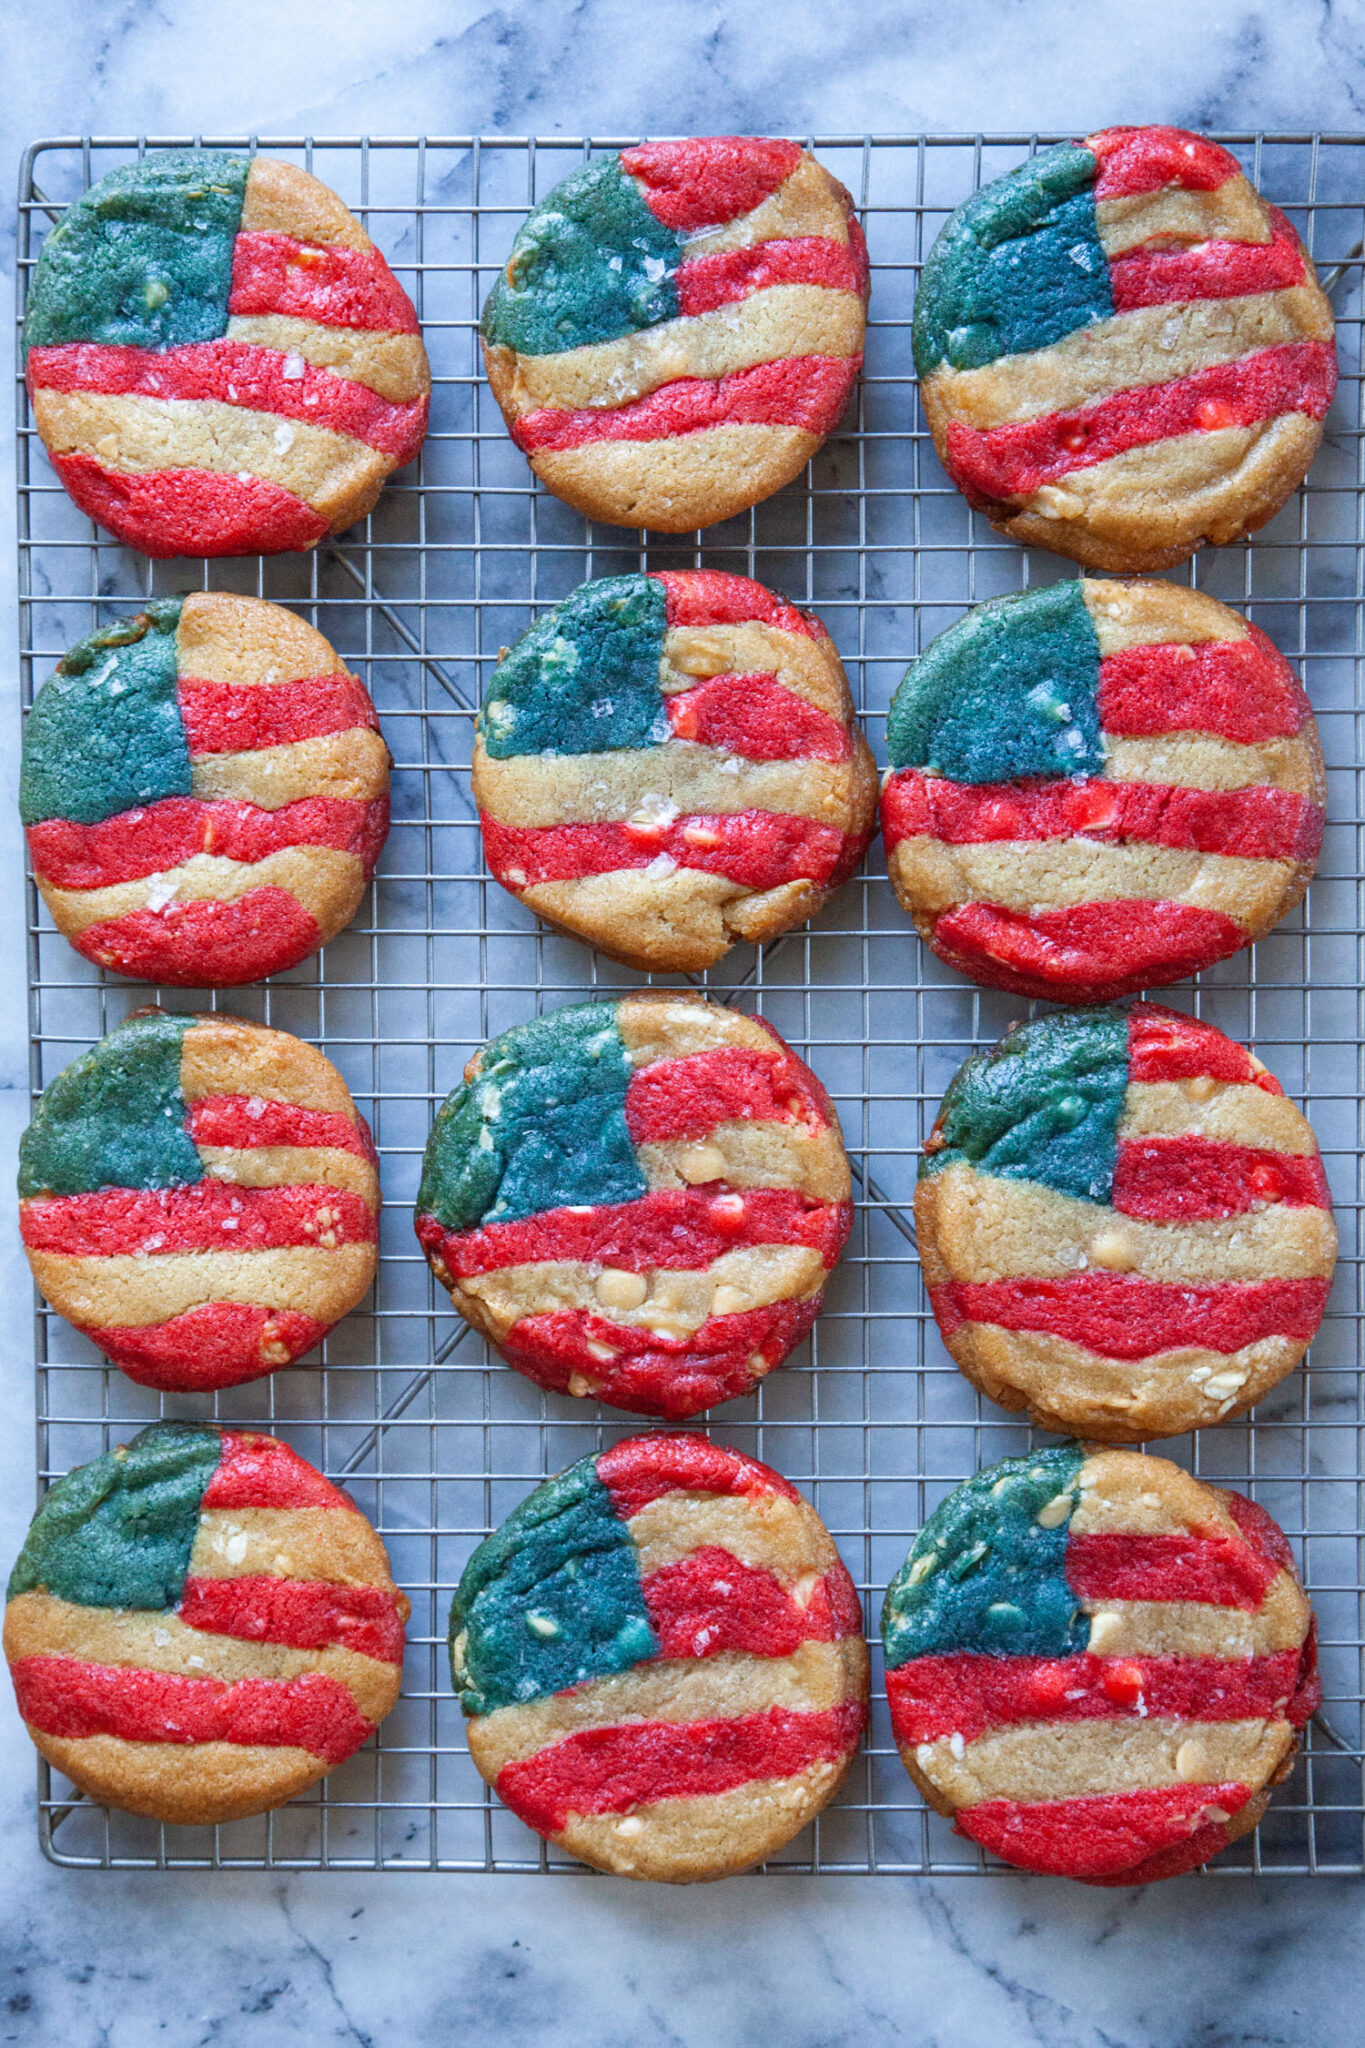 Red, white, and blue American flag-inspired cookies sitting on a wire cooling rack.